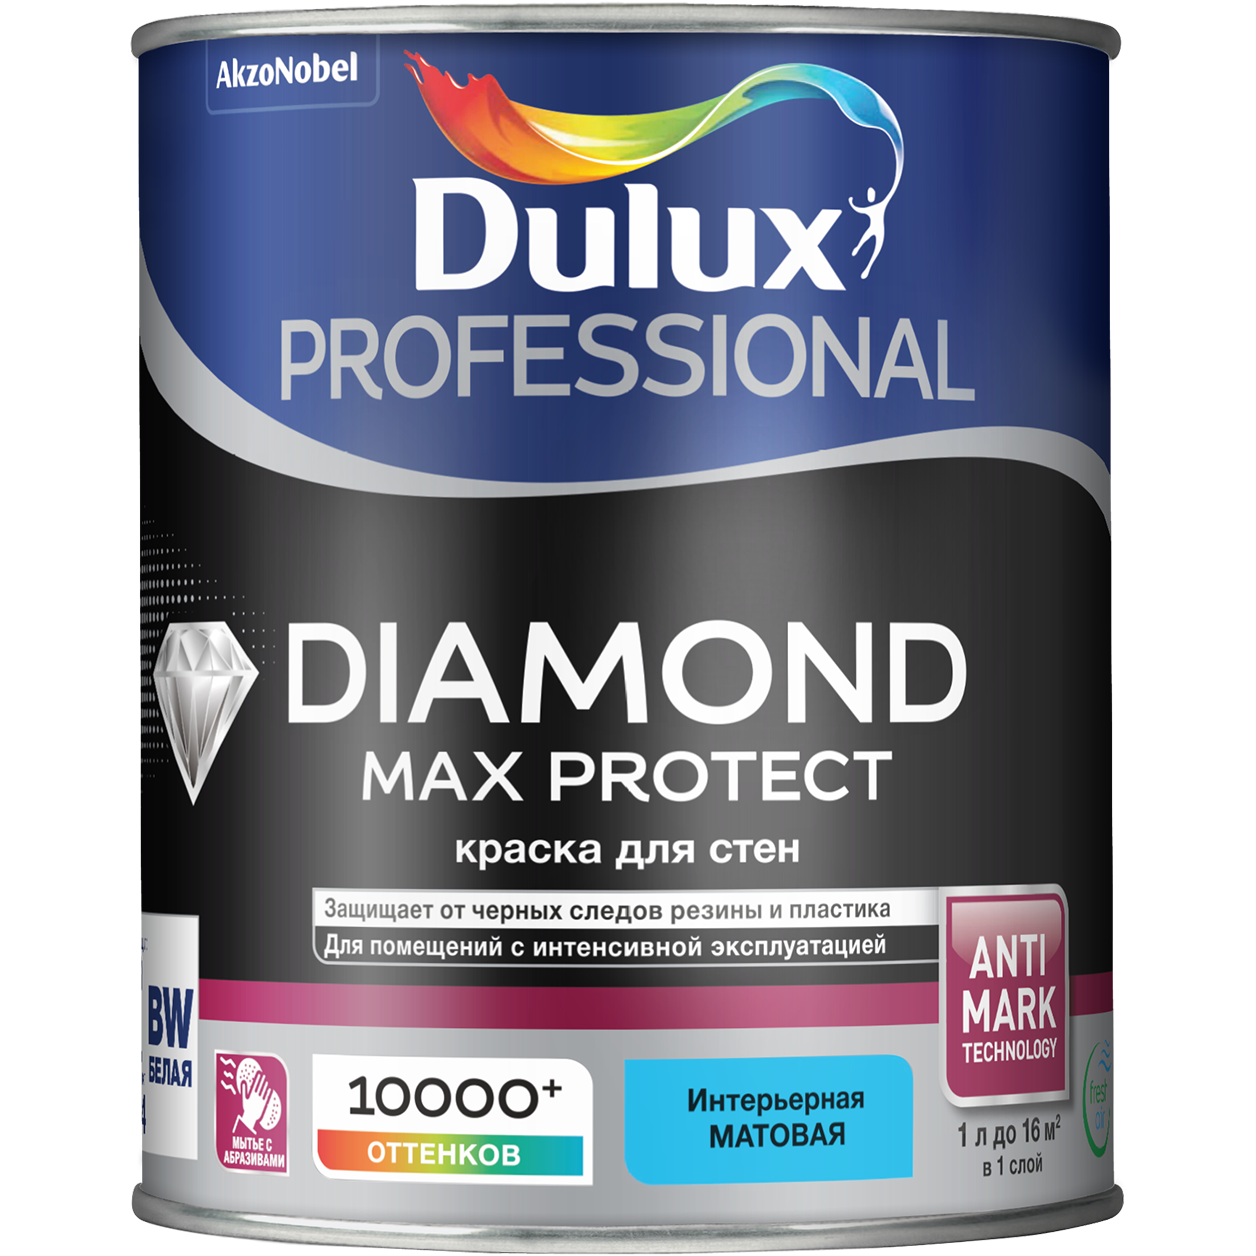 Dx_Max_Protect_BW_1L